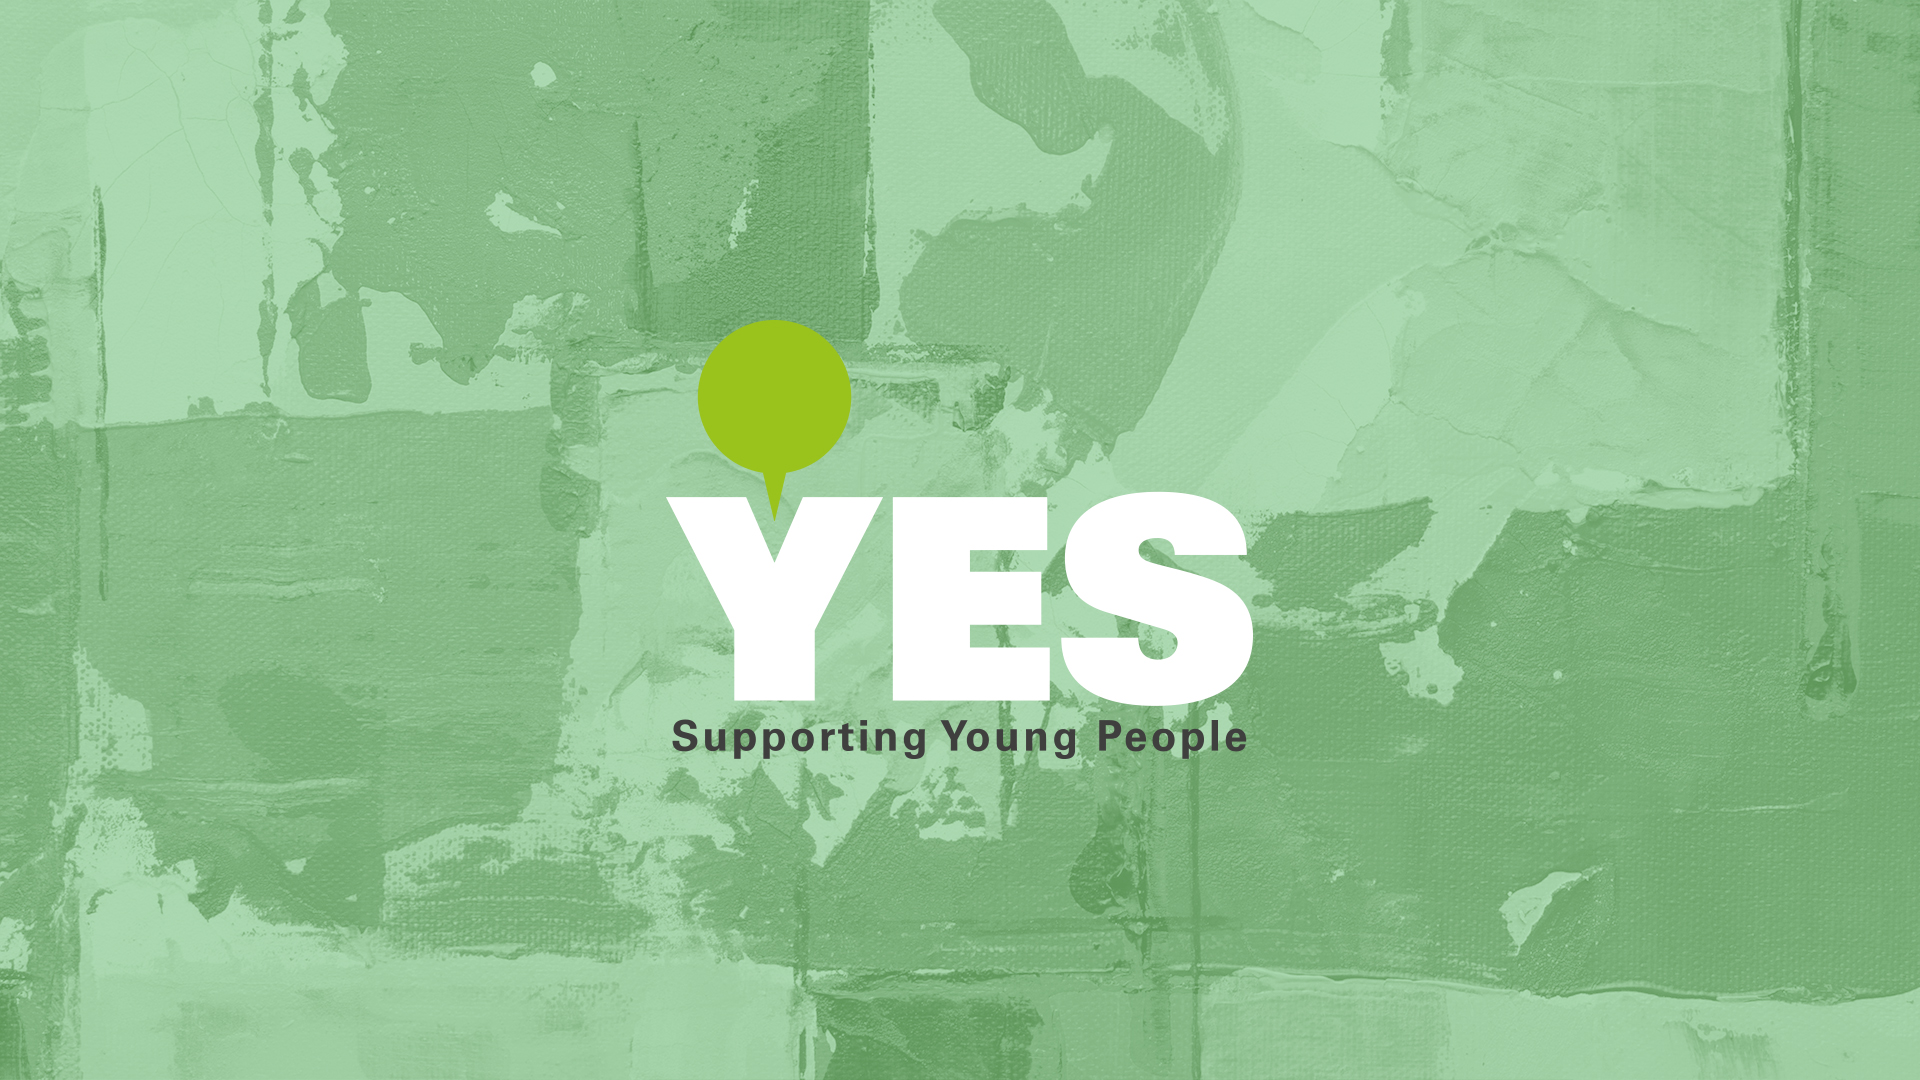 Header Image of background texture with YES logo